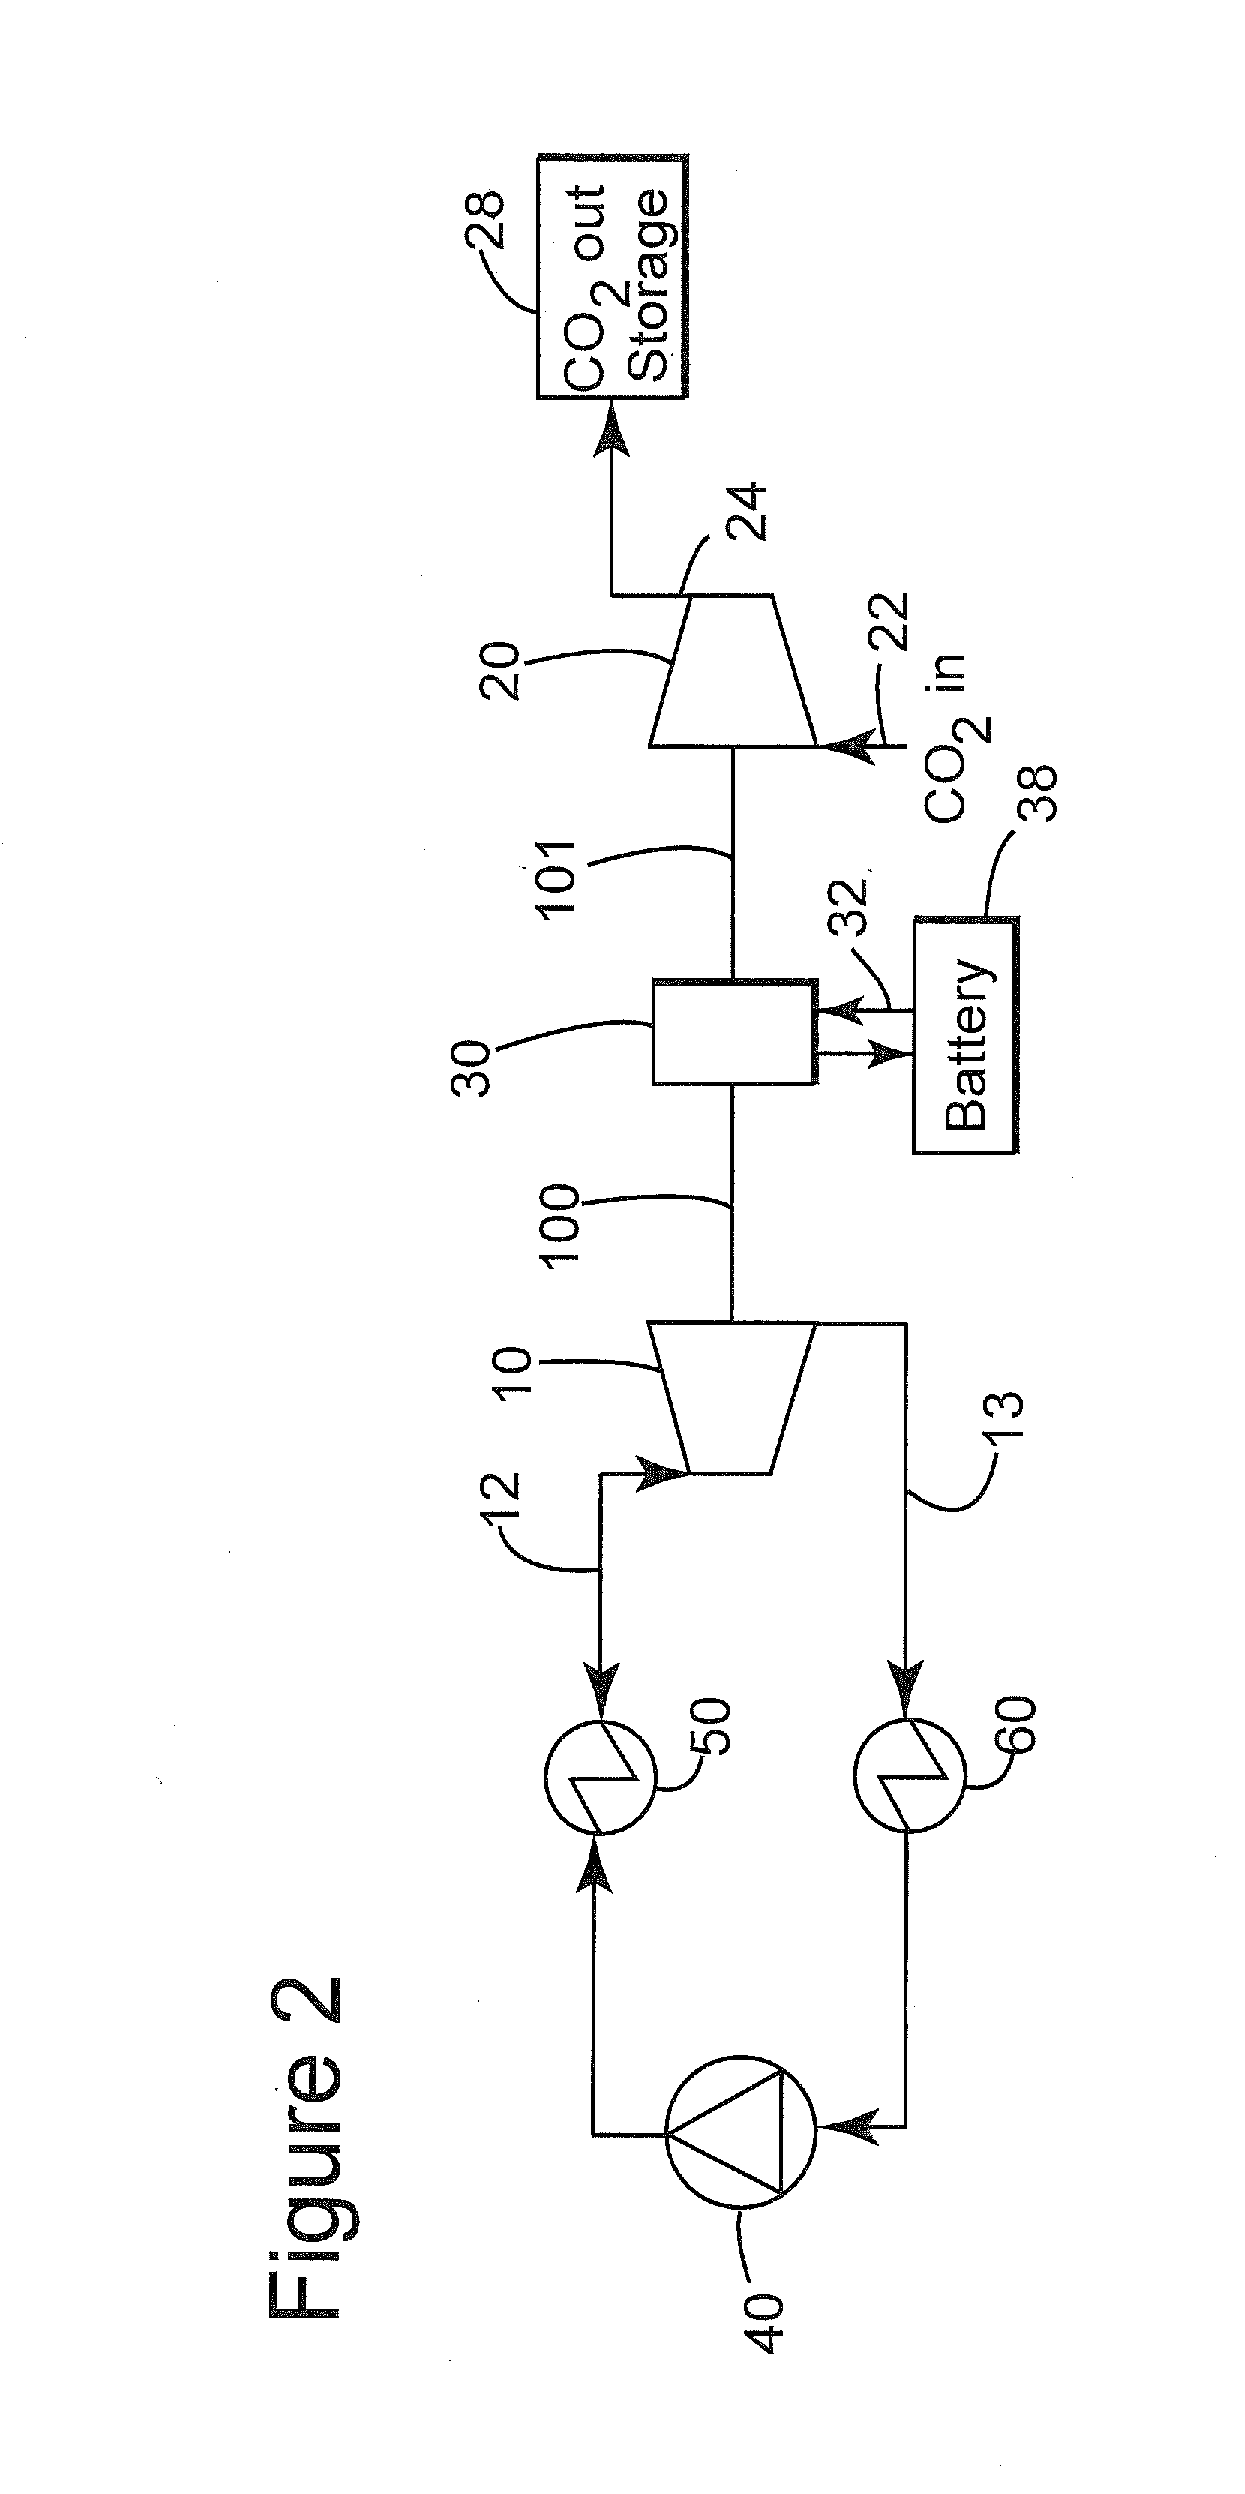 Integrated method of driving a co2 compressor of a co2-capture system using waste heat from an internal combustion engine on board a mobile source